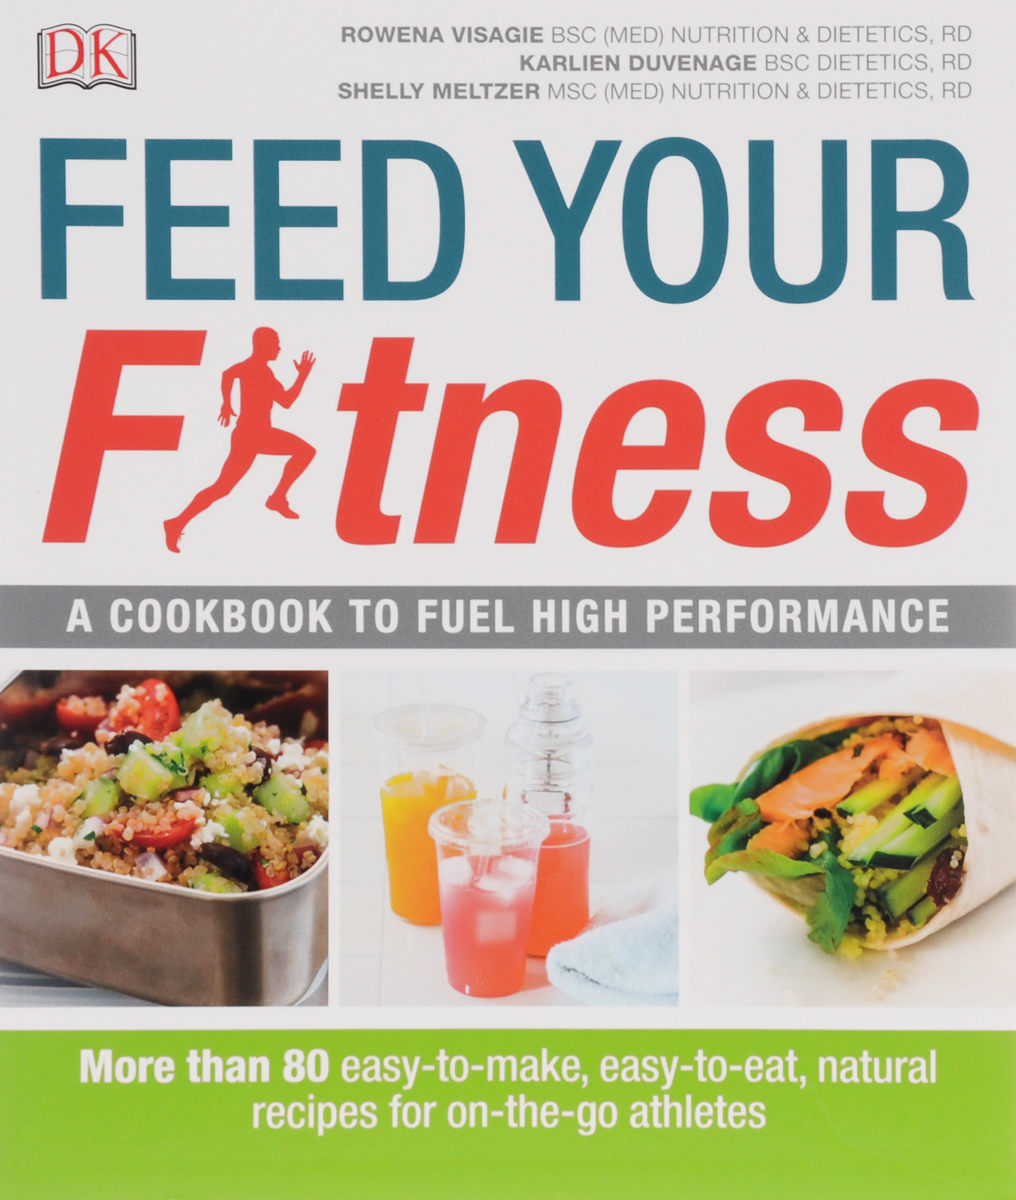 Feed Your Fitness